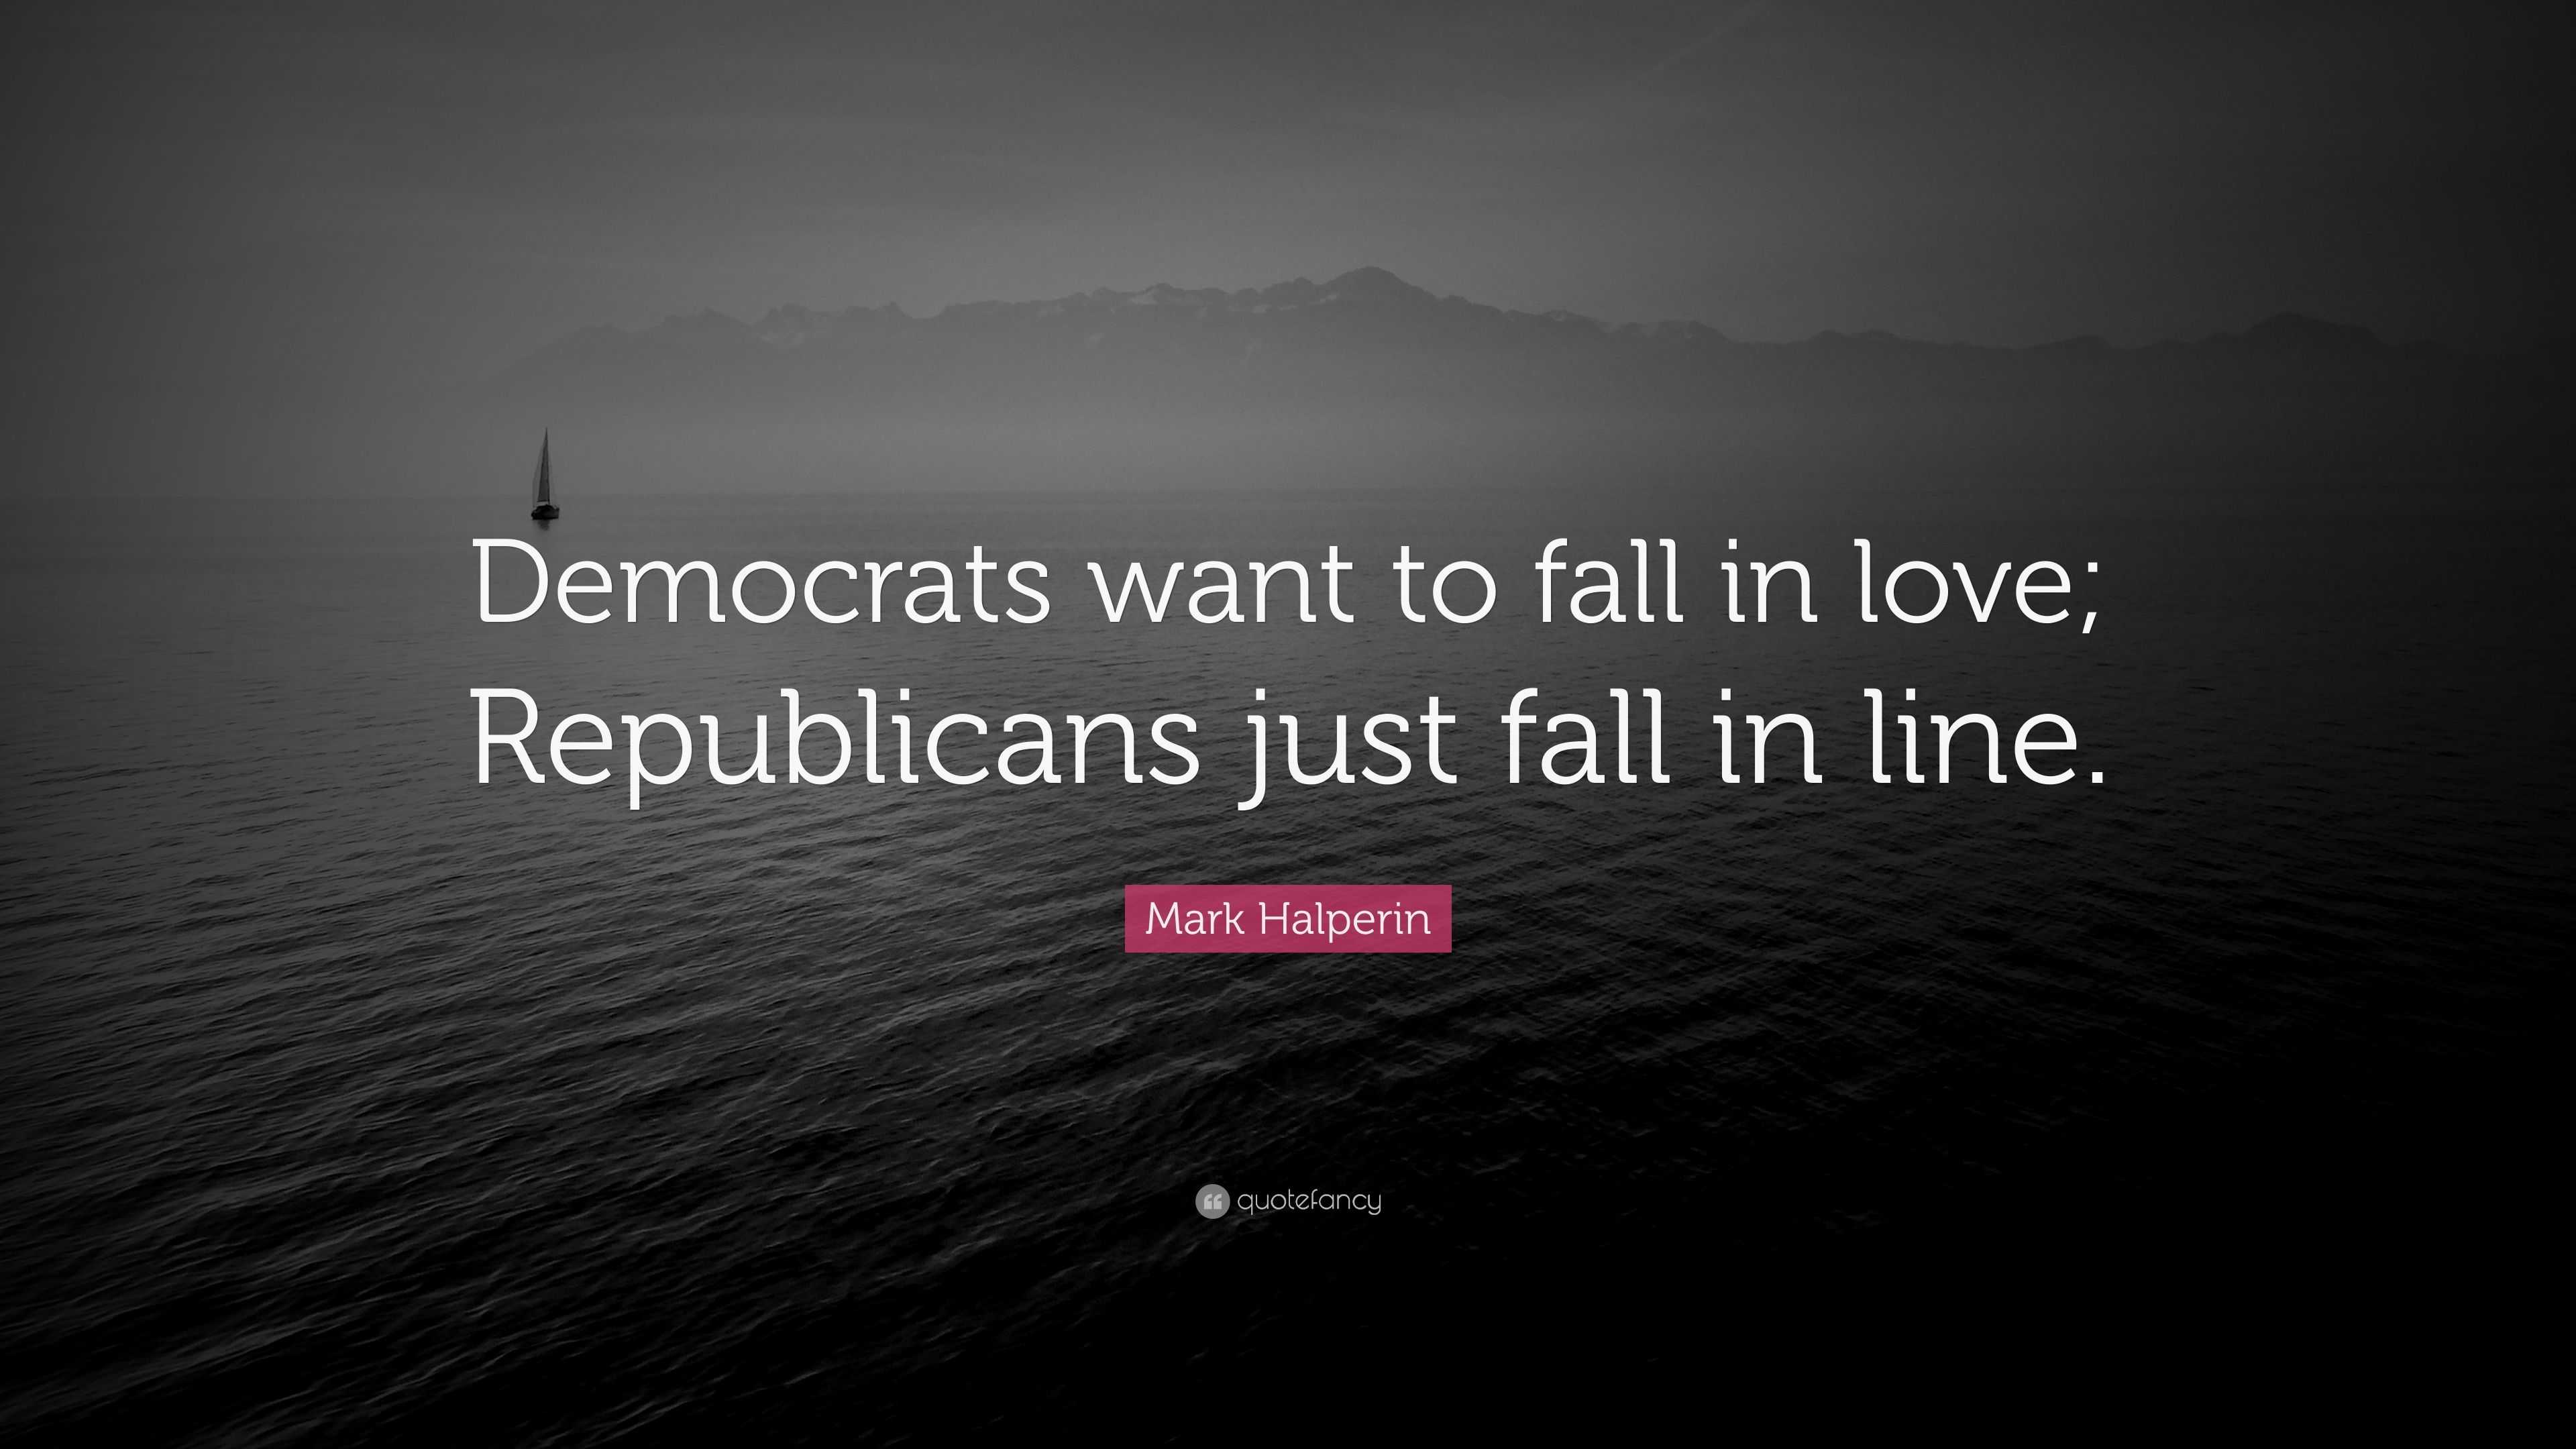 Mark Halperin Quote “Democrats want to fall in love Republicans just fall in